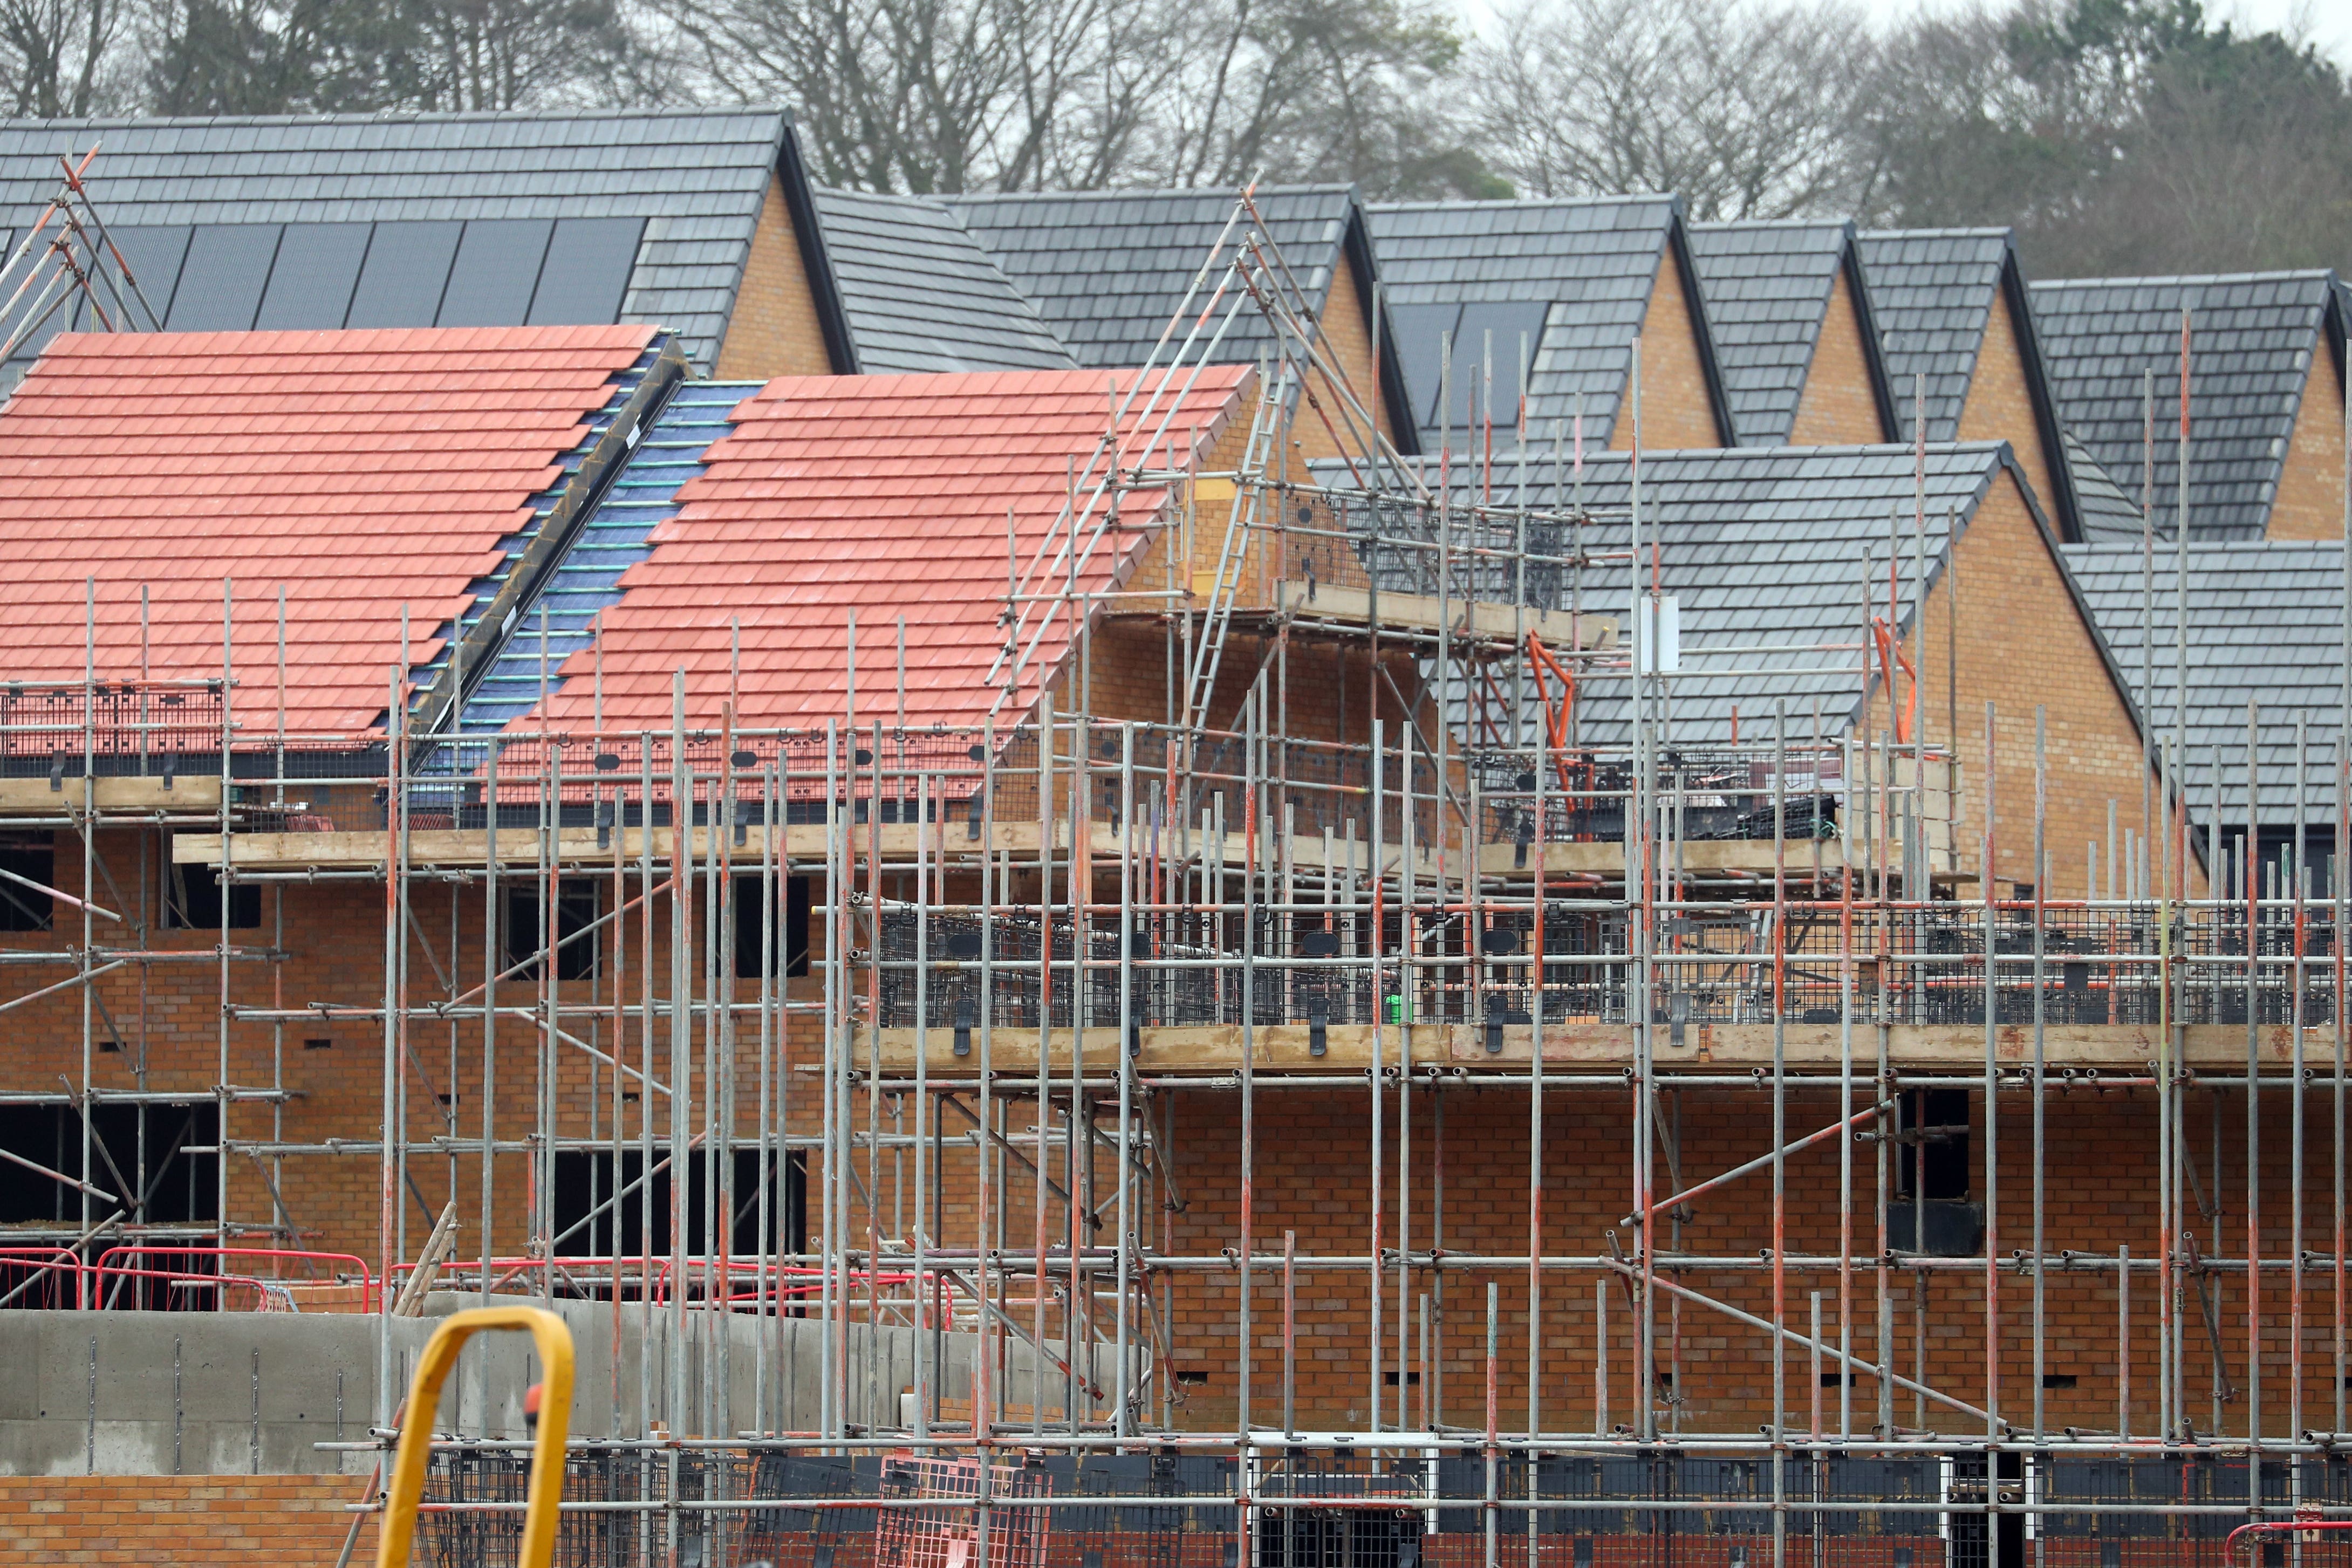 It is vital that the government build more houses